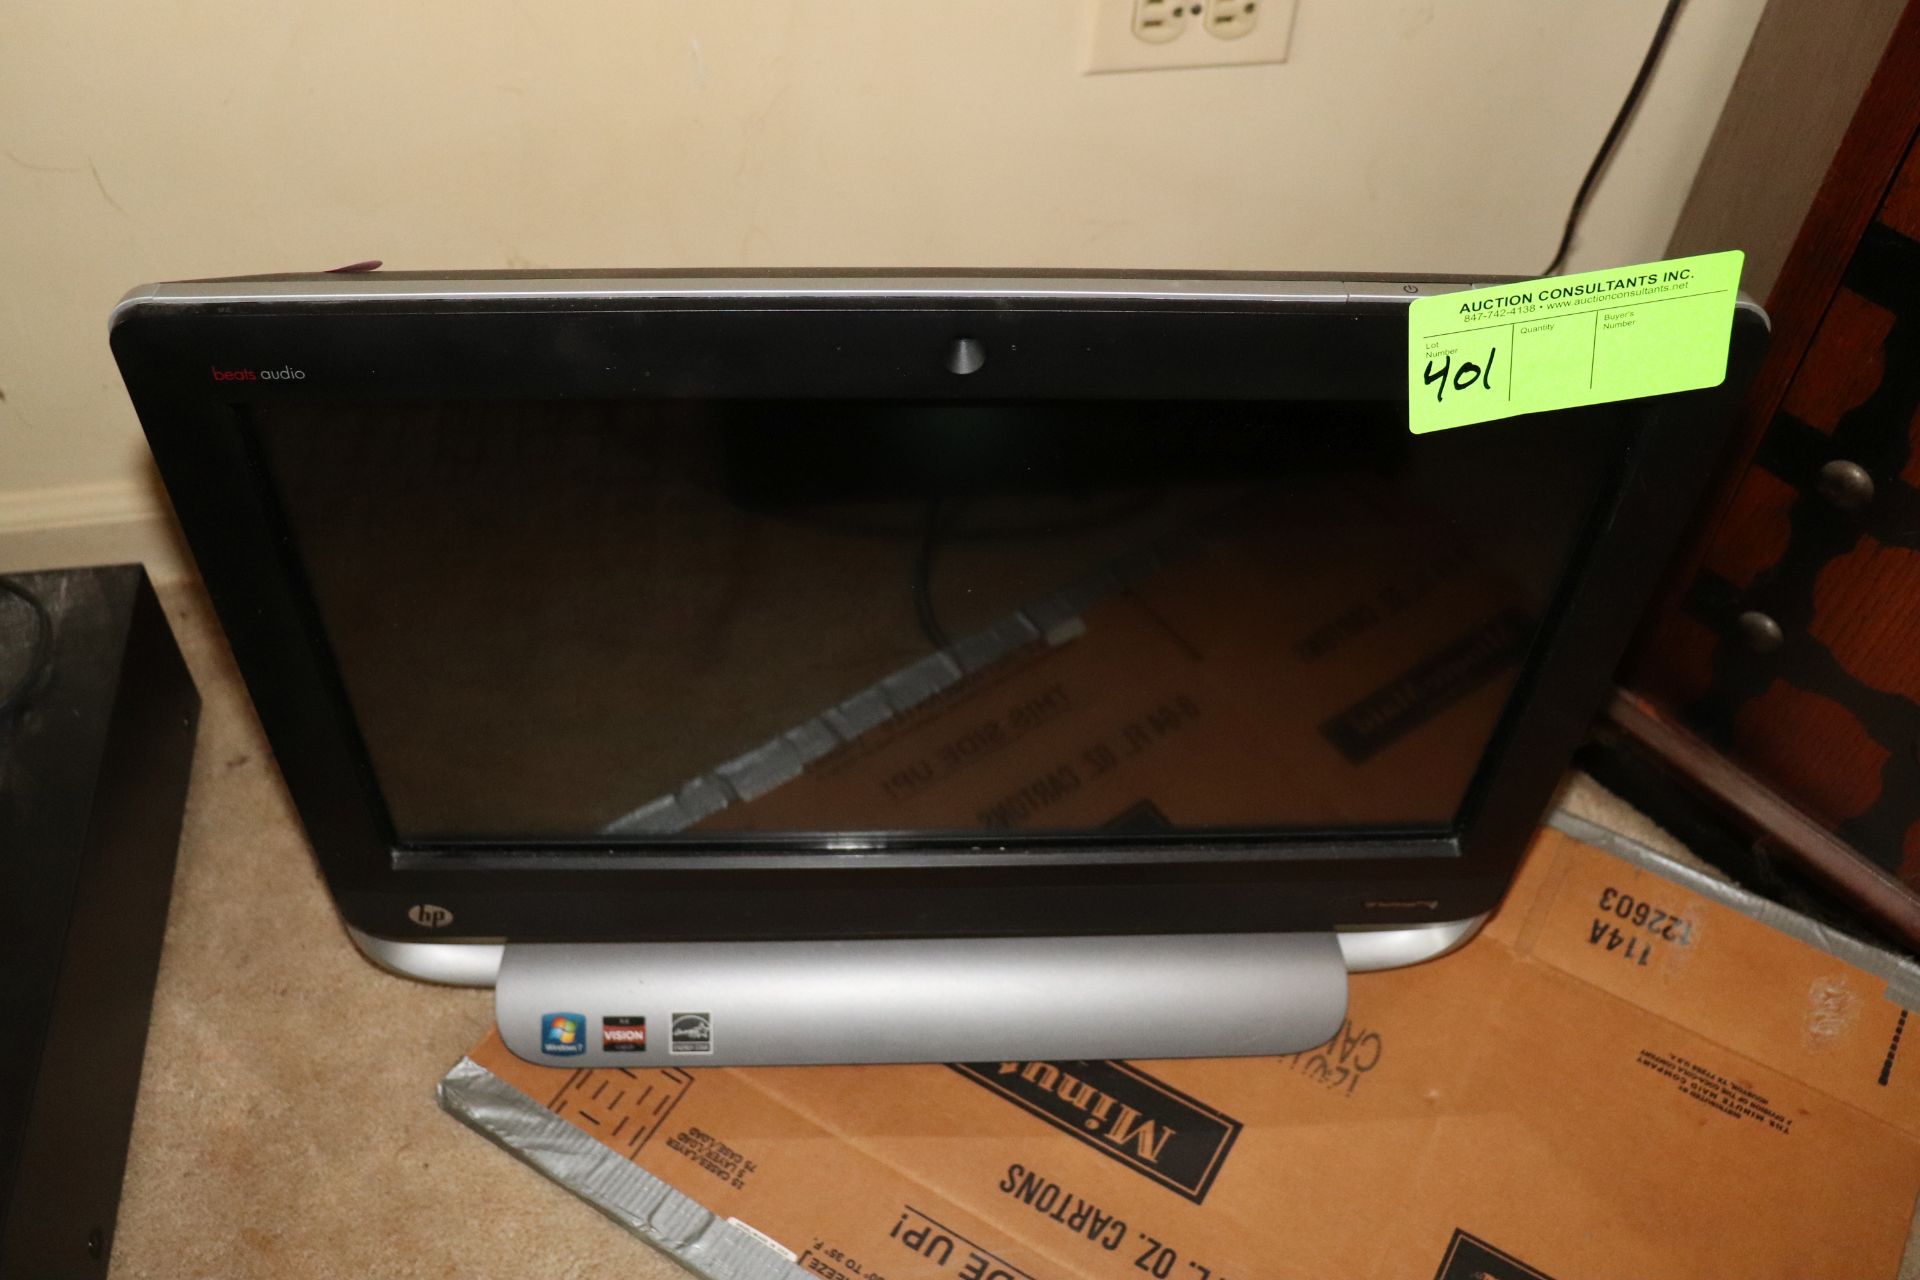 HP monitor with Beats audio, Product QP788AA#ABA, model 320-1030, 20" screen